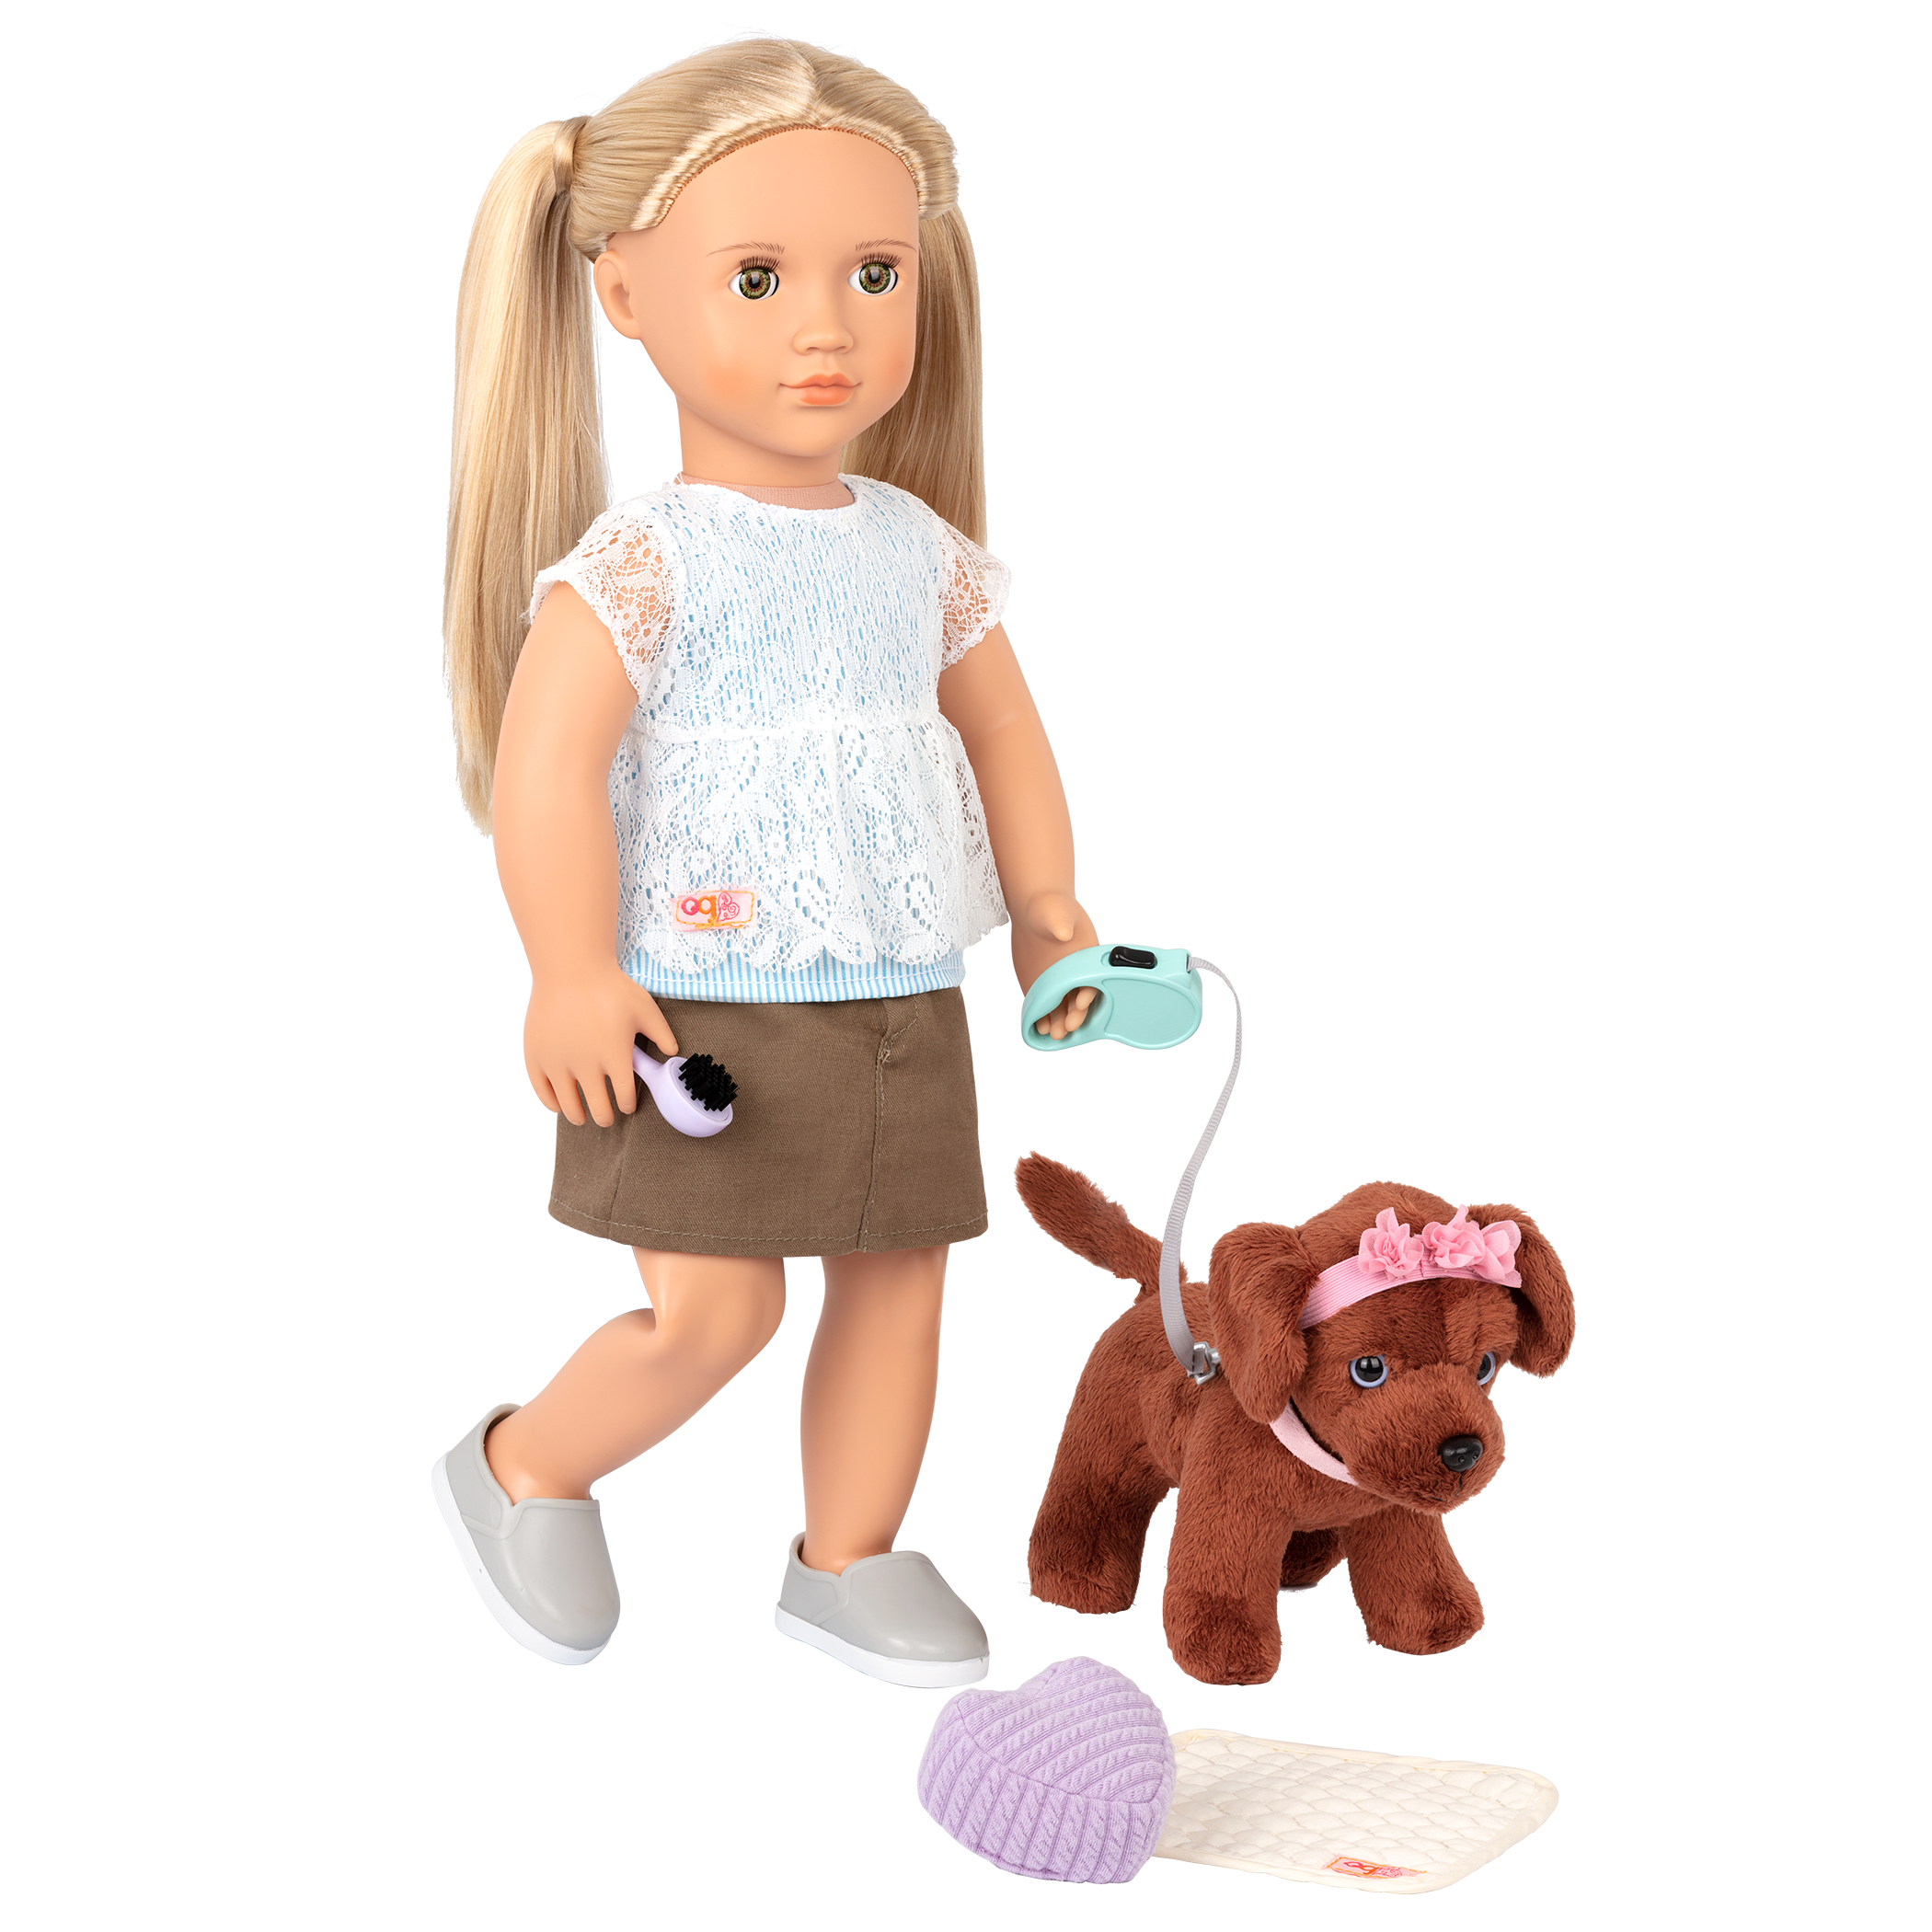 18-inch doll and dog plushie using pet care playset